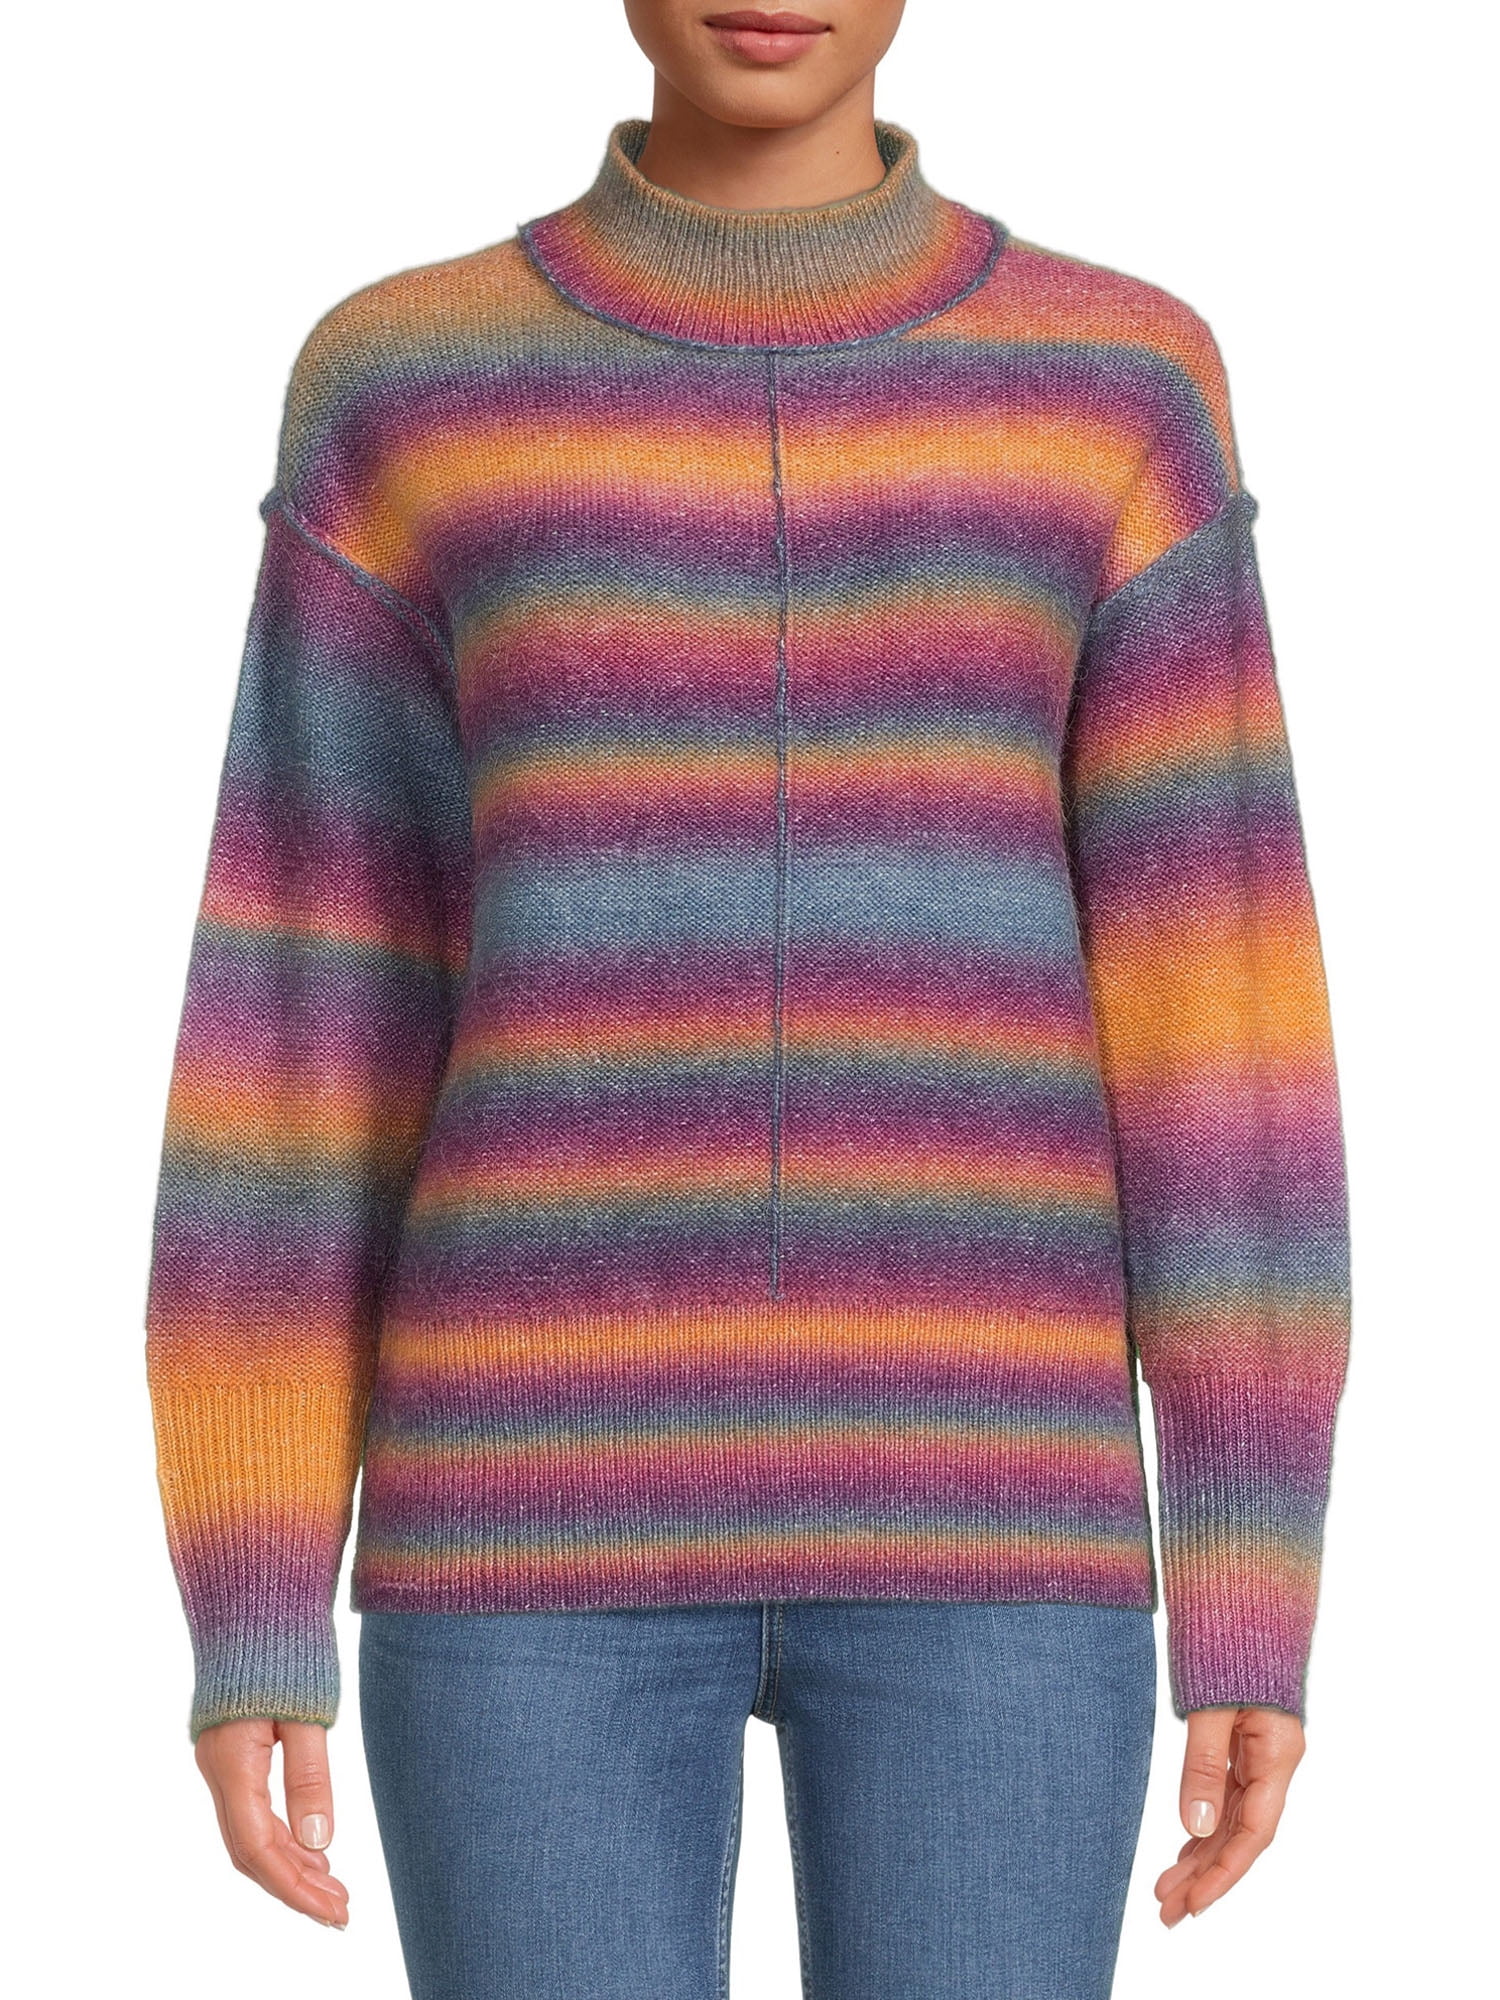 BeachLunchLounge Women's Rainbow Ombre Mock Neck Sweater, Midweight